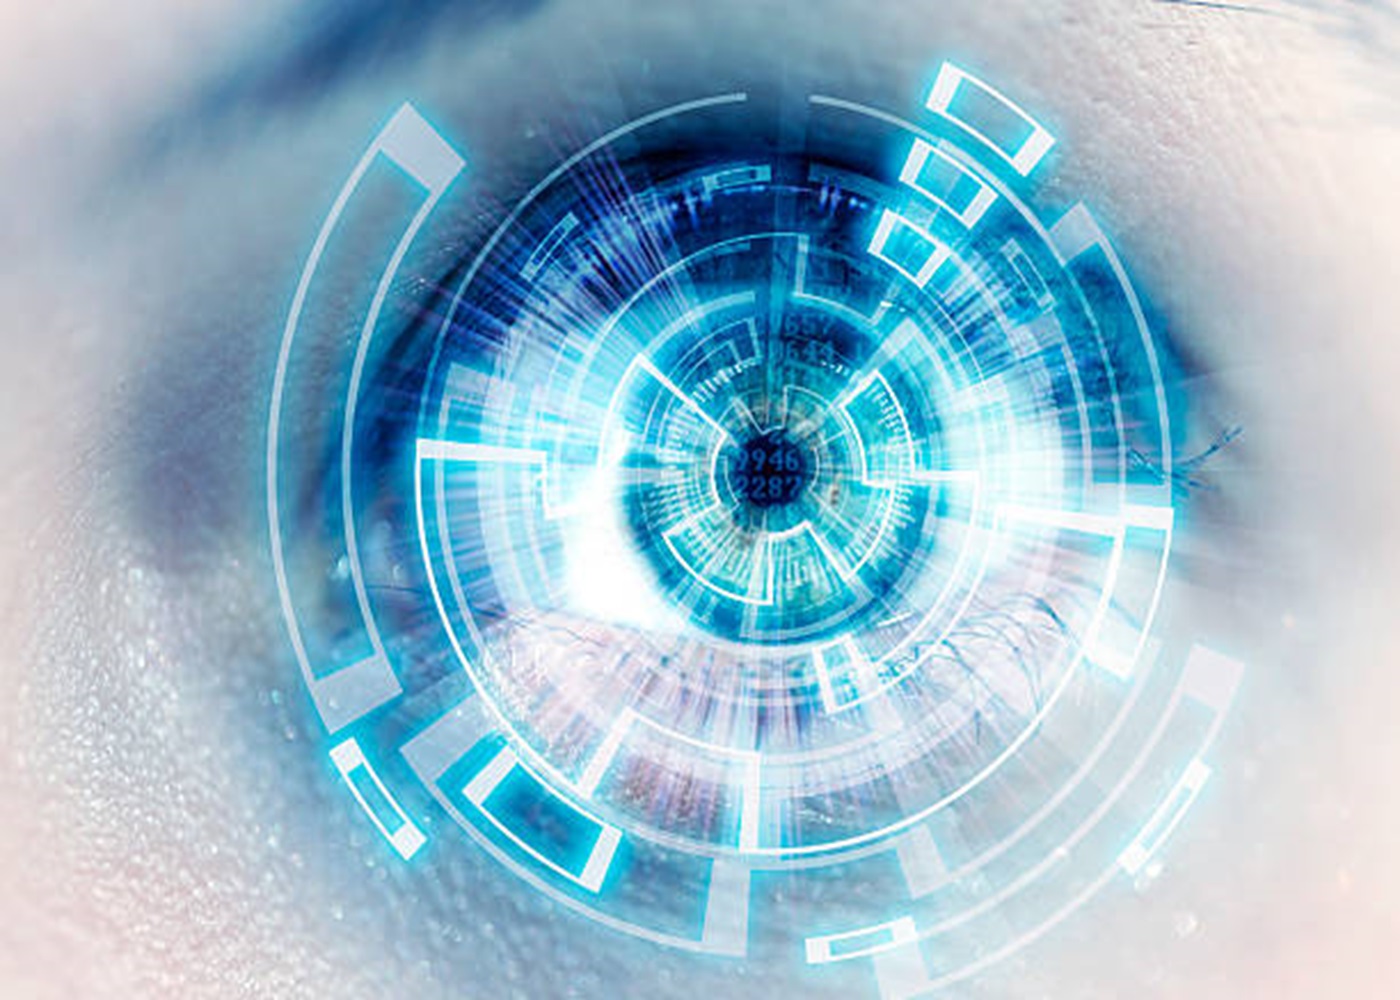 Bring the Vision of Futuristic Technology to Life with Iris Recognition